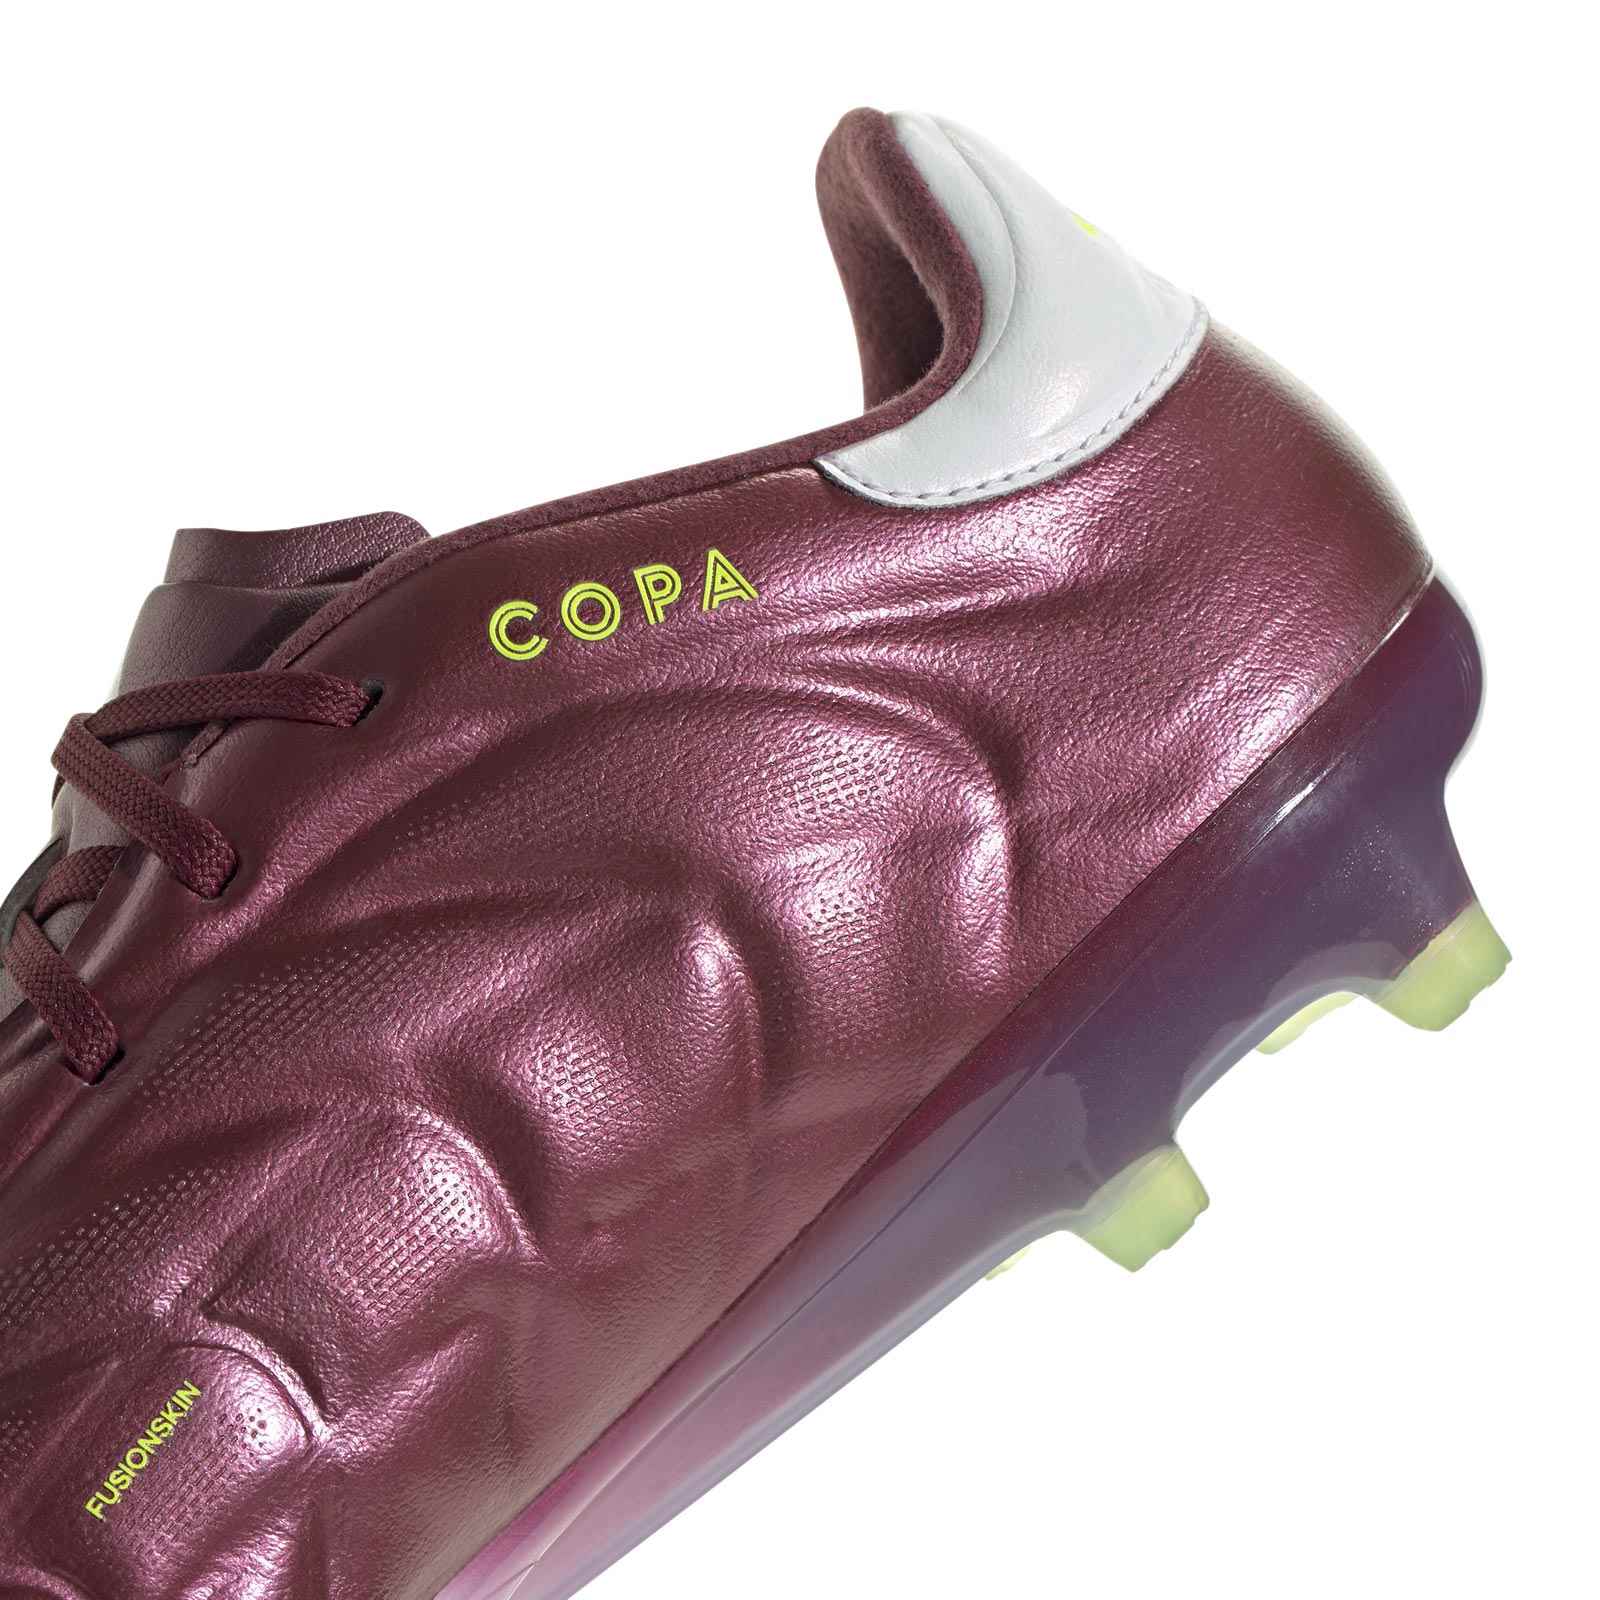 adidas Copa Pure II Elite Firm Ground Football Boots 